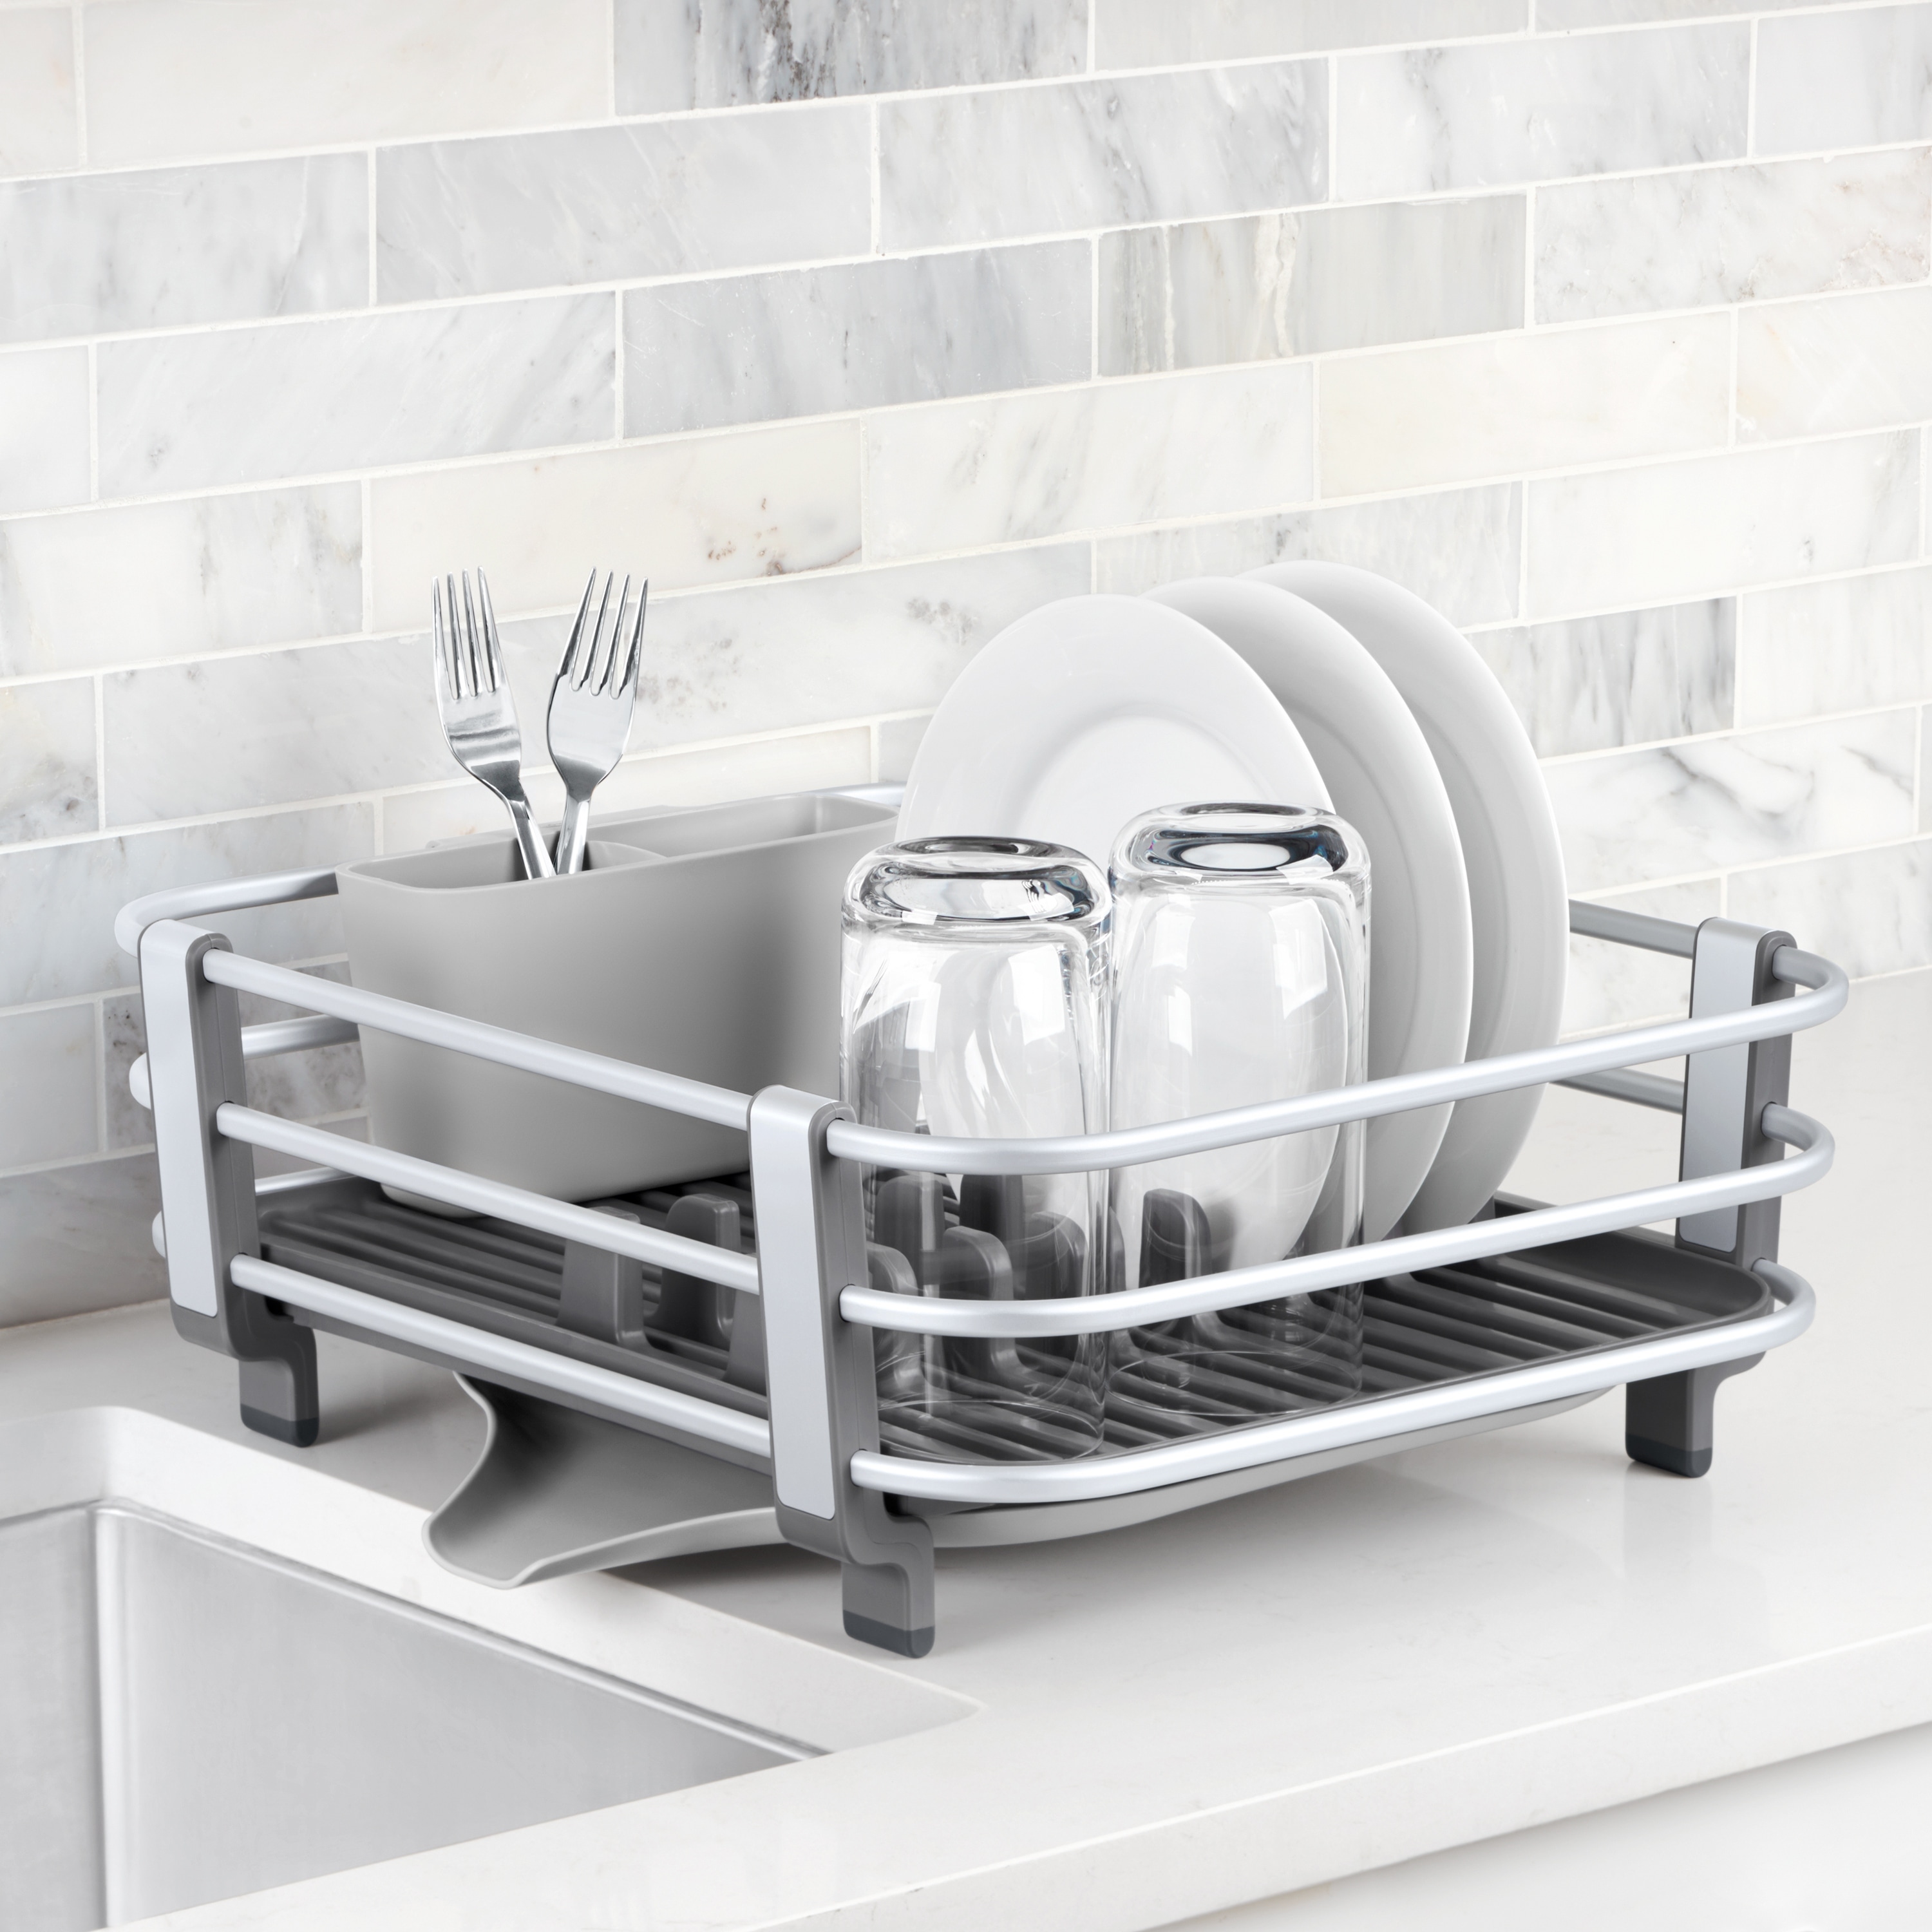 https://ak1.ostkcdn.com/images/products/is/images/direct/e2ada408d157f7b35fd198c5e0841a8d966d2f2a/OXO-Good-Grips-Aluminum-Frame-Dish-Rack.jpg